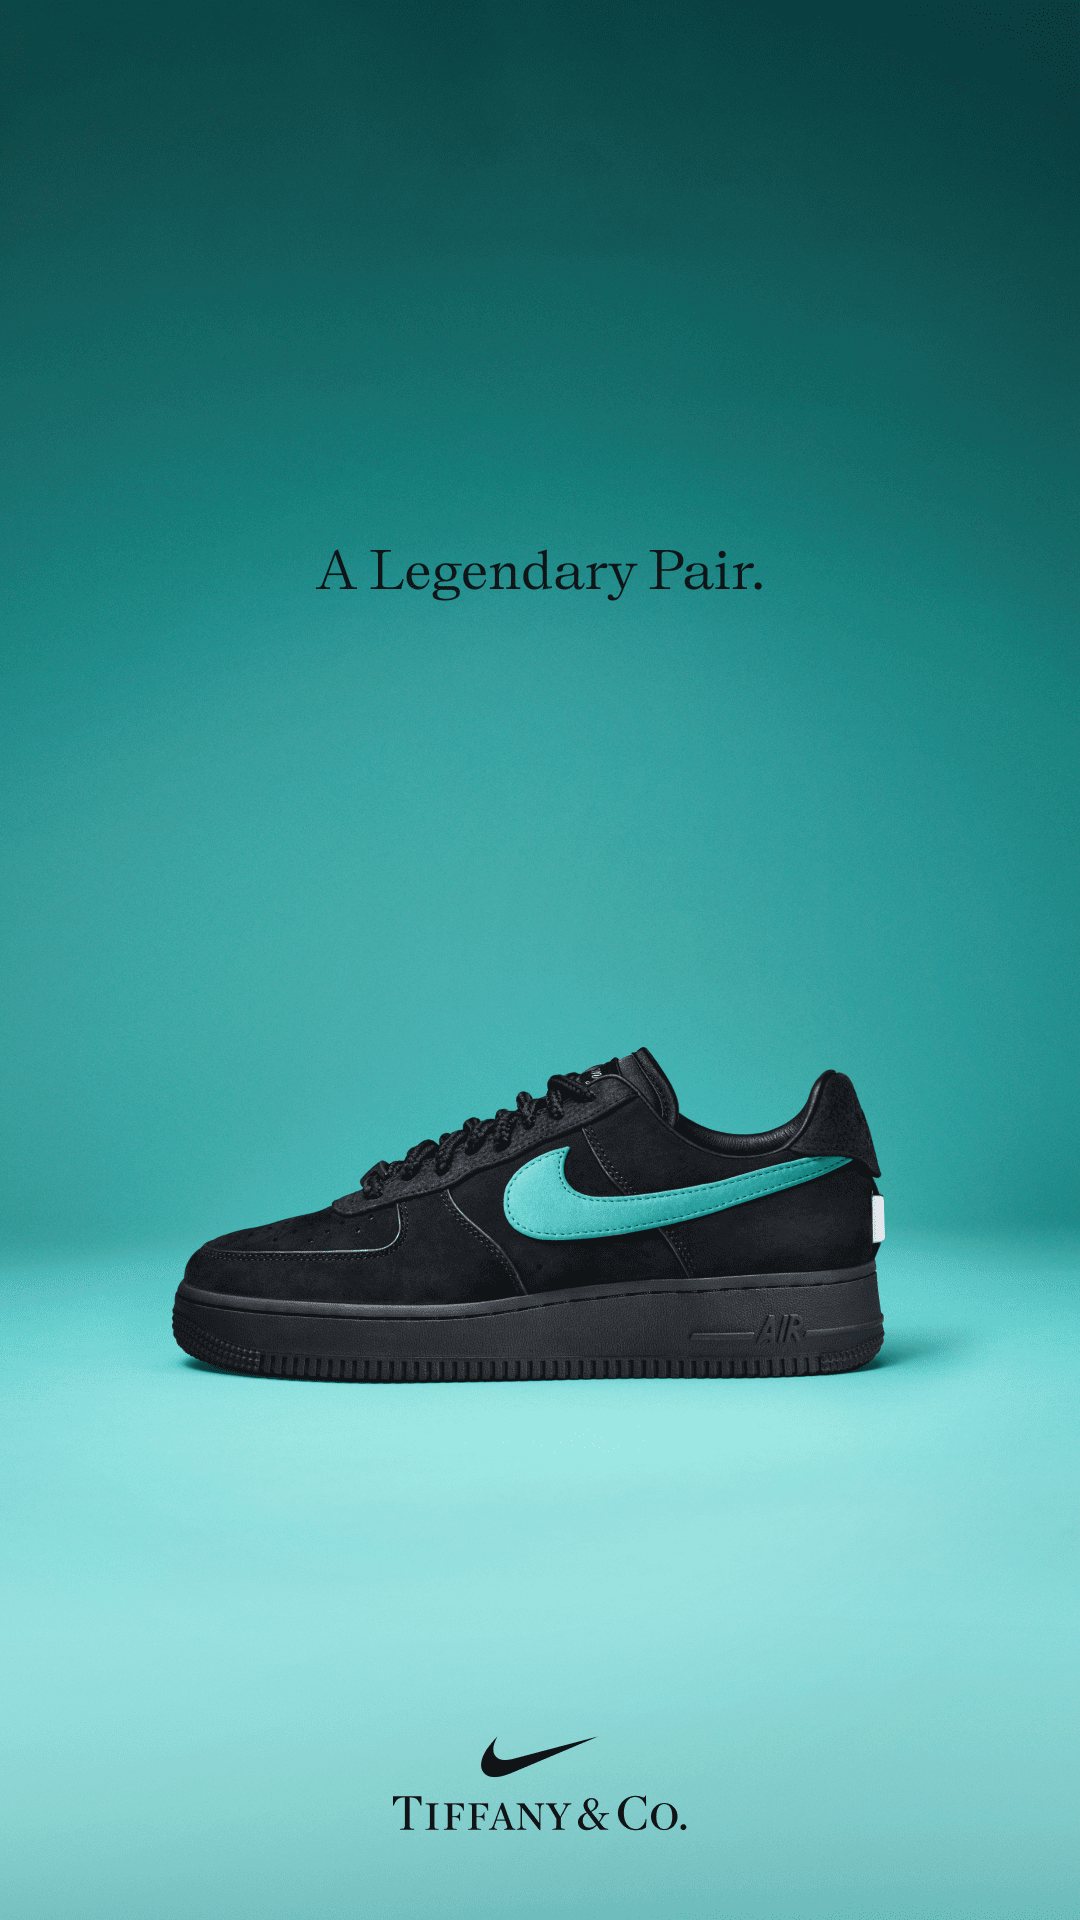 【NIKE公式】SNKRS Special: Air Force 1 x Tiffany & Co.